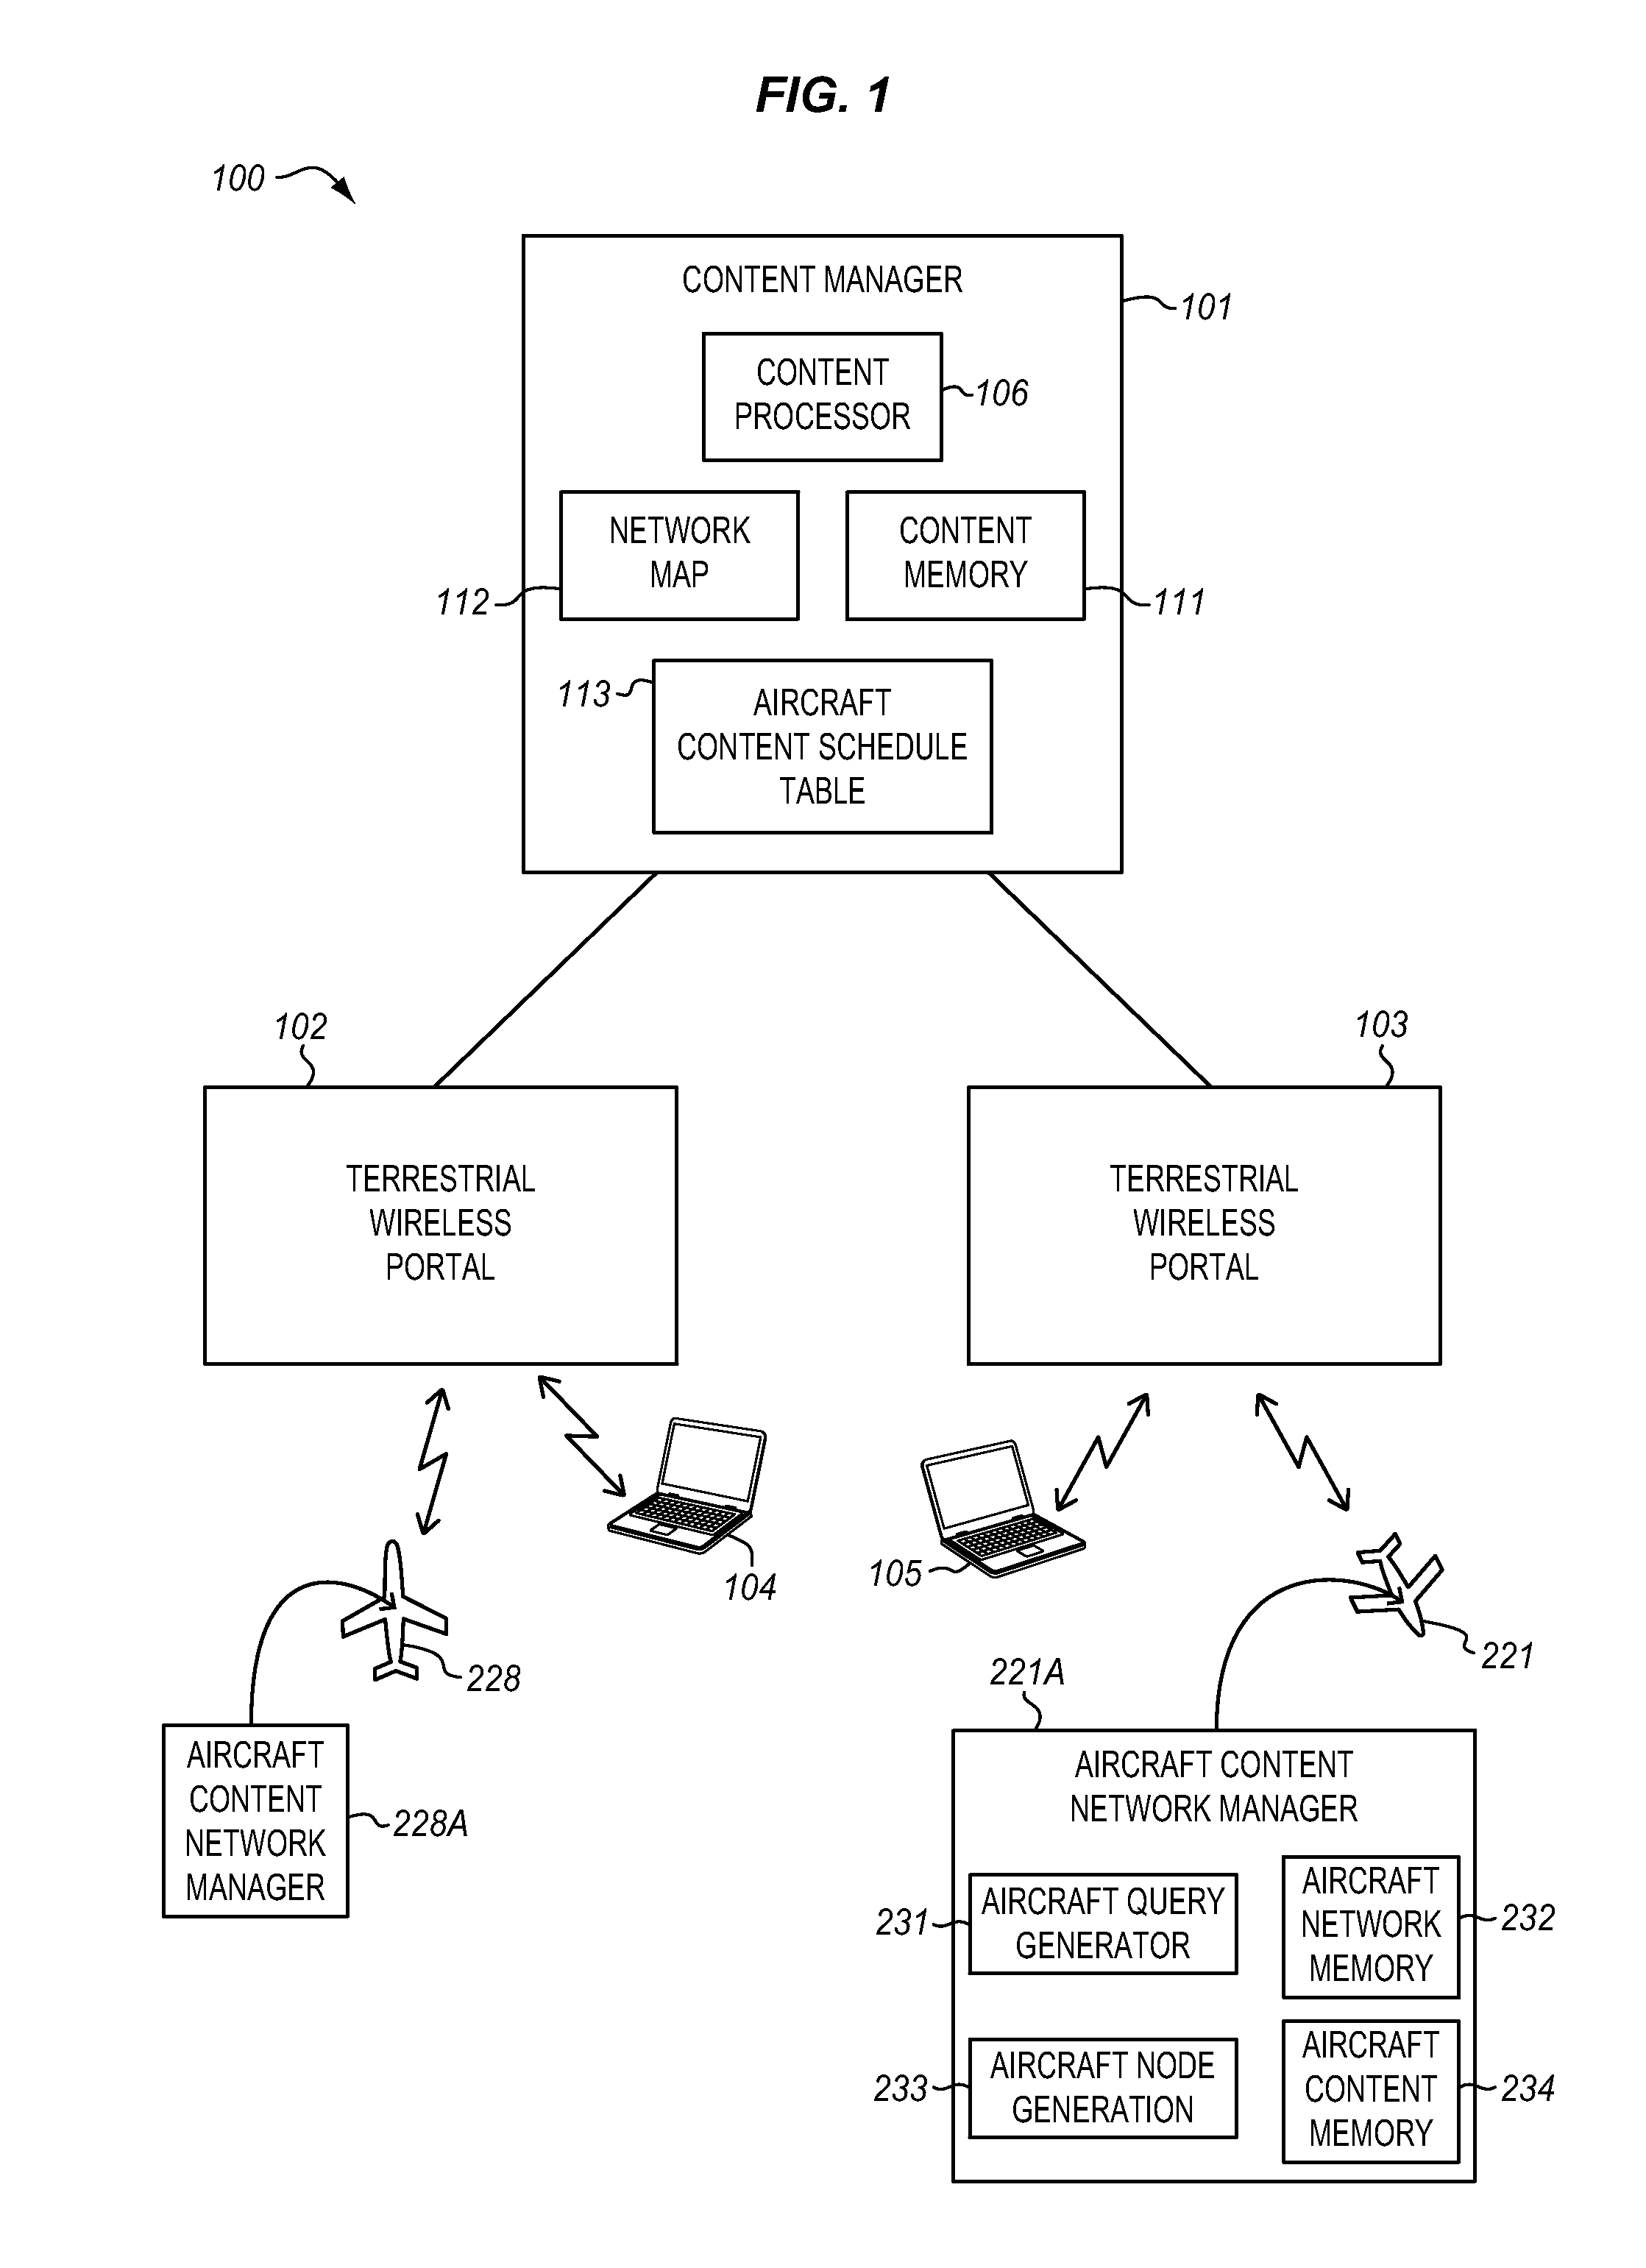 Mesh network based automated upload of content to aircraft